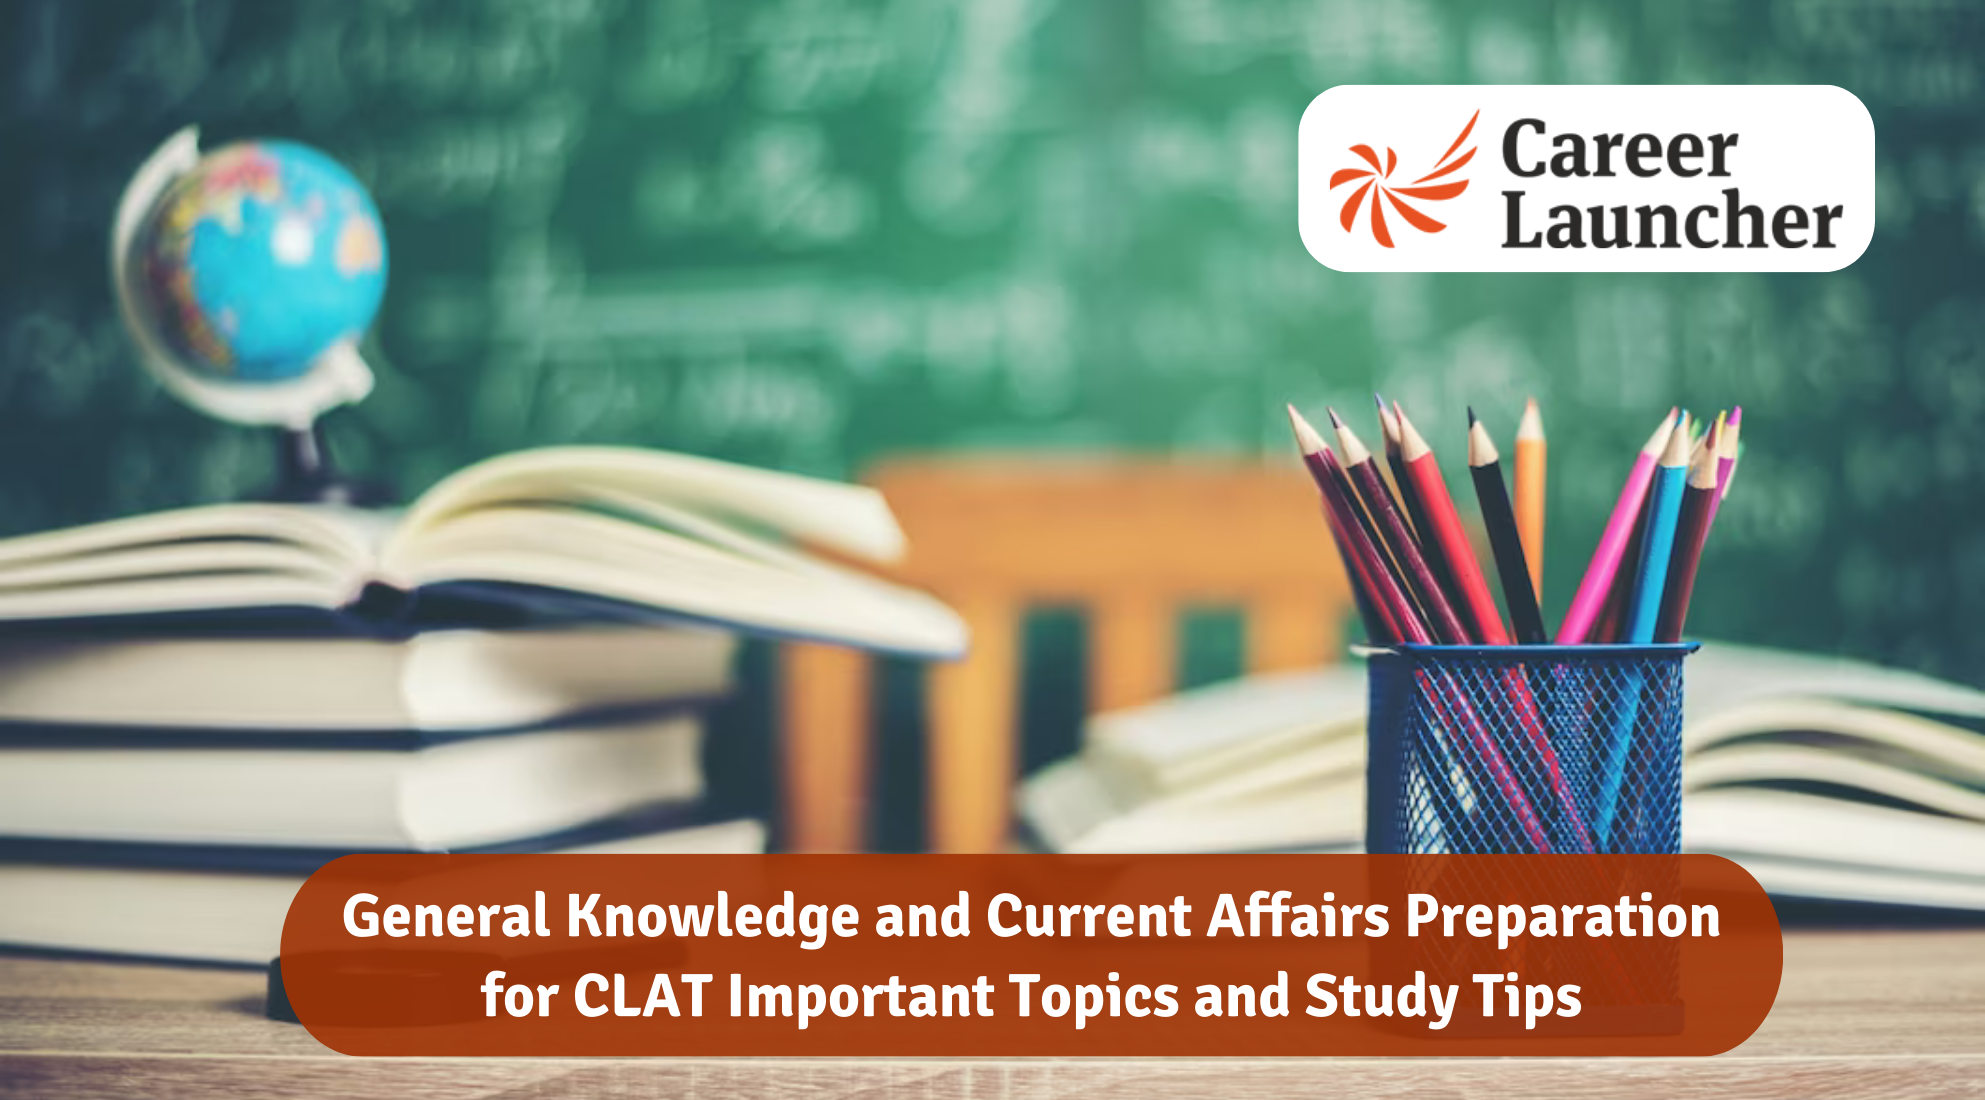 General Knowledge and Current Affairs Preparation for CLAT Important Topics and Study Tips